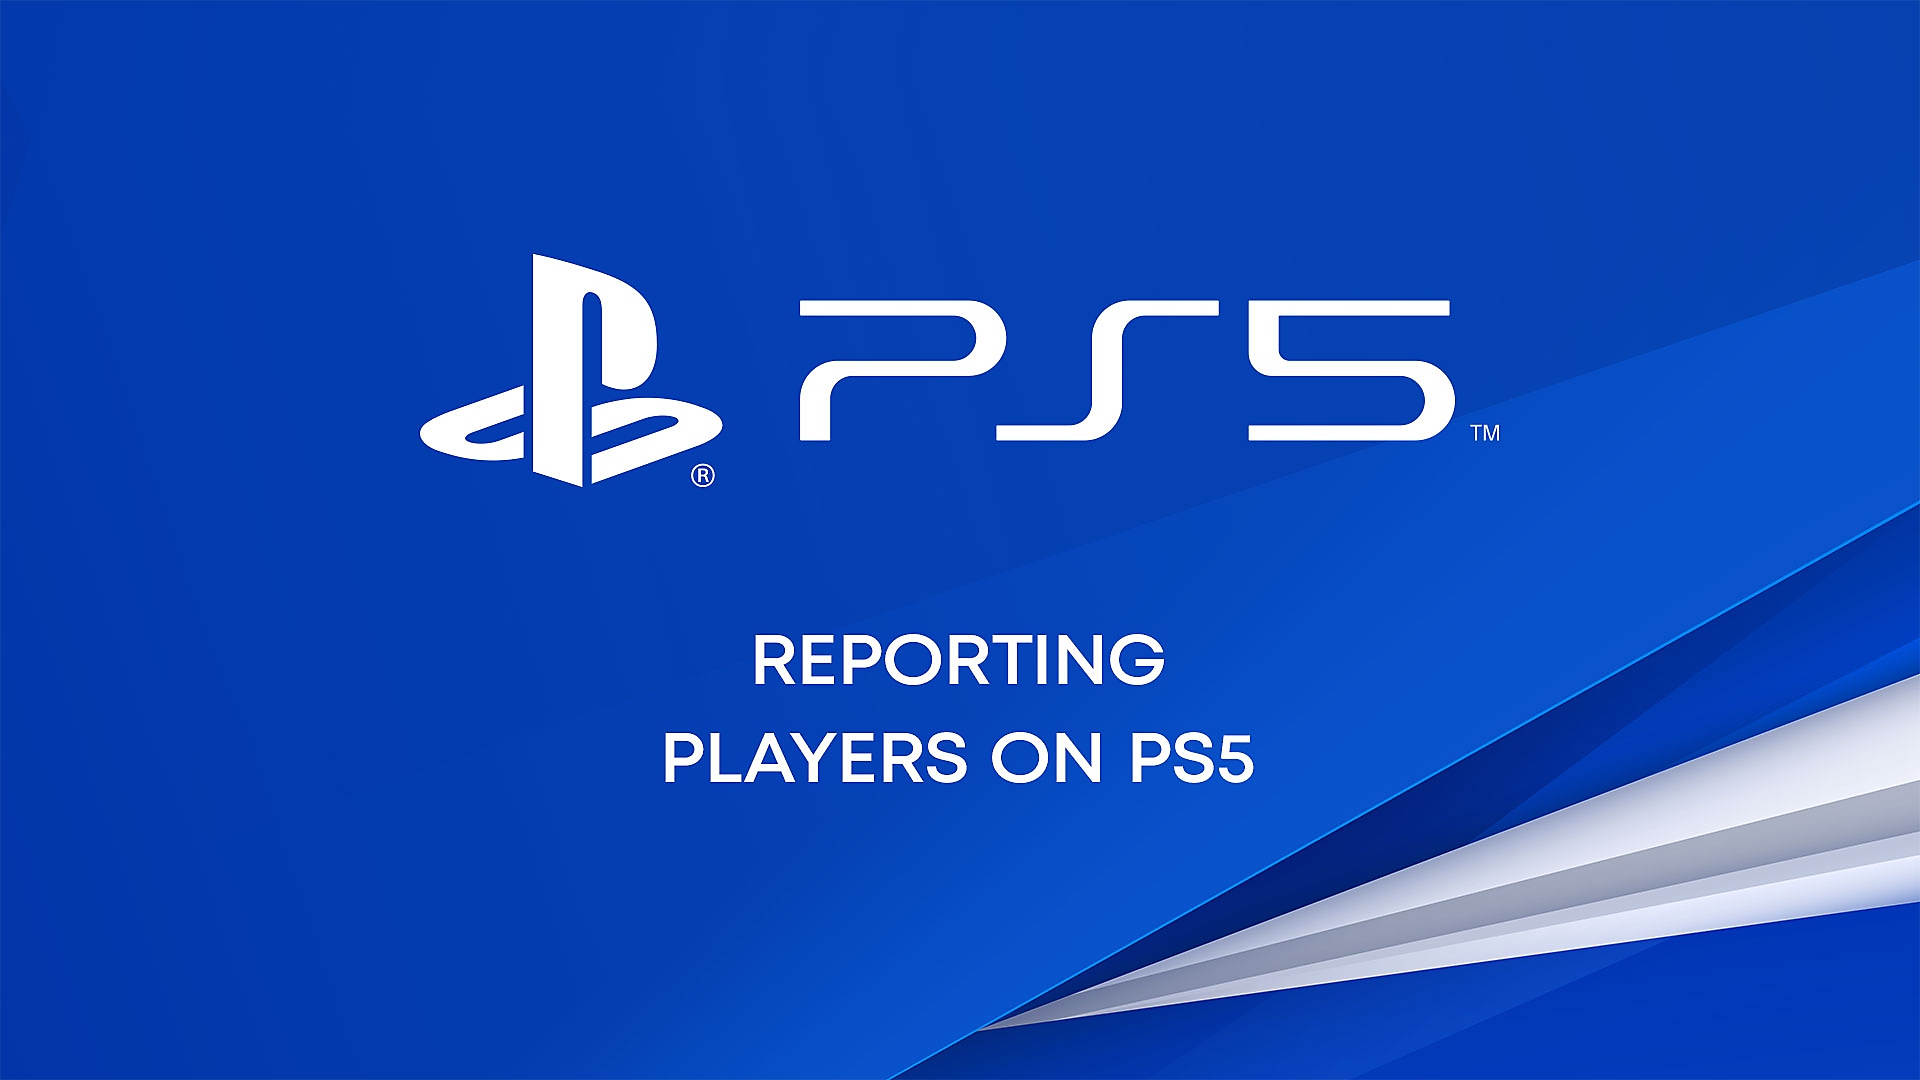 Youtube video about how to report players on PS5 console.